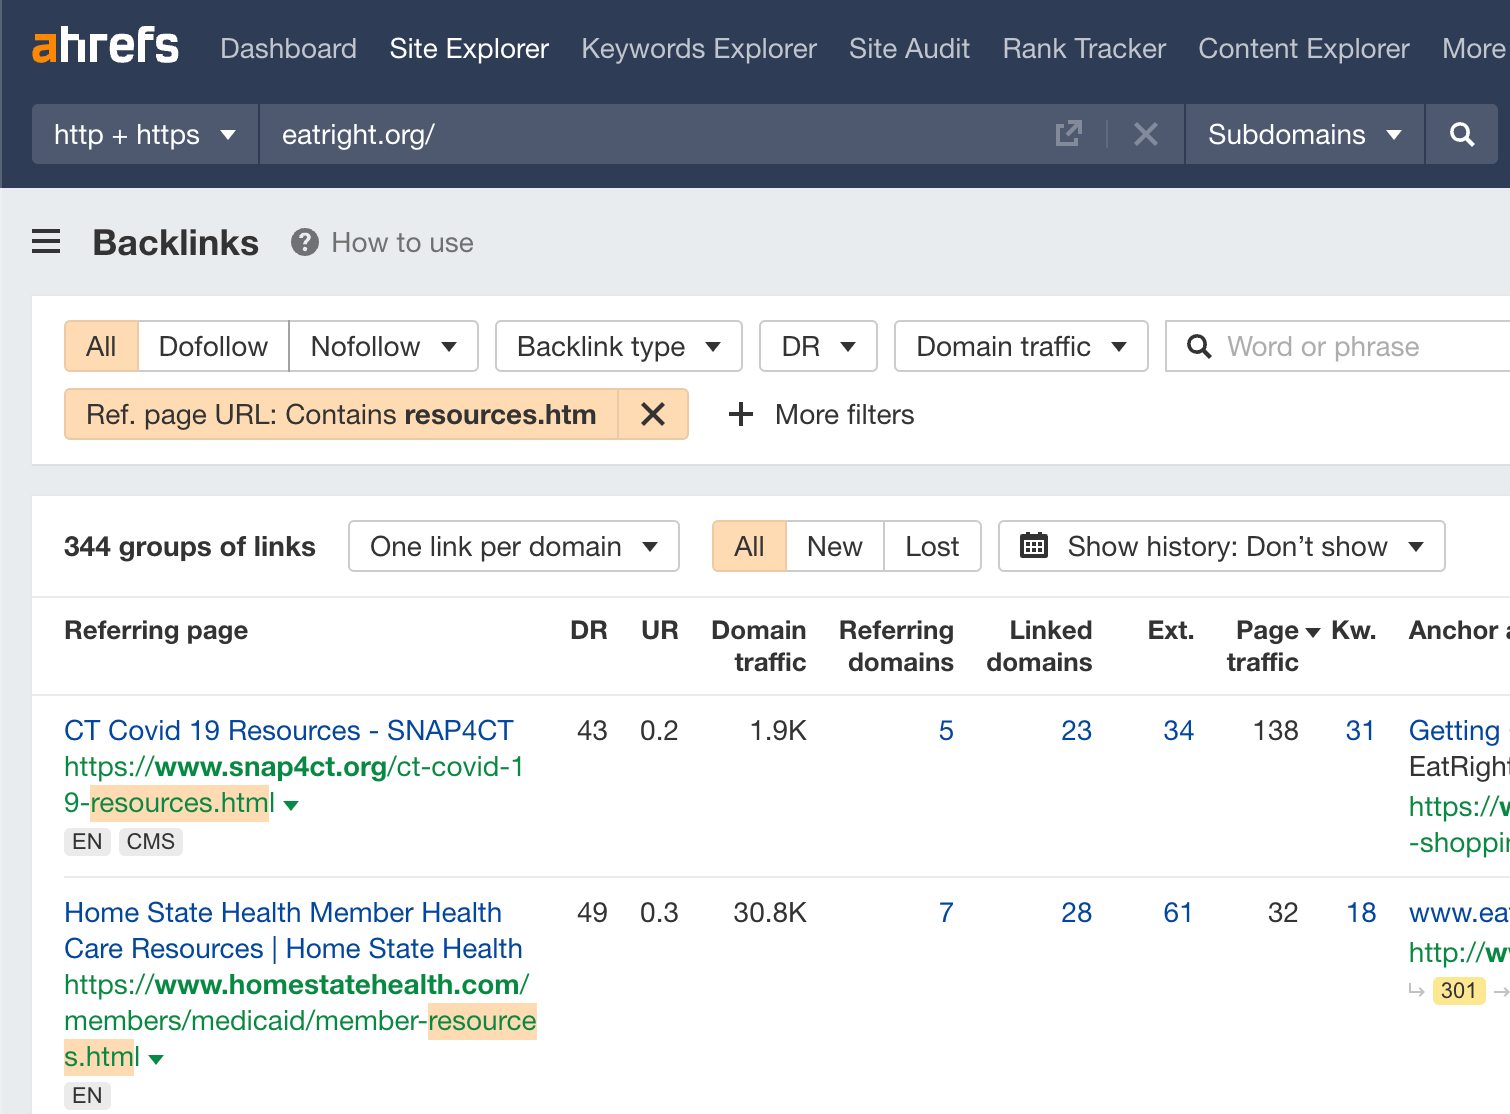 Finding resource pages in Ahrefs' Site Explorer
